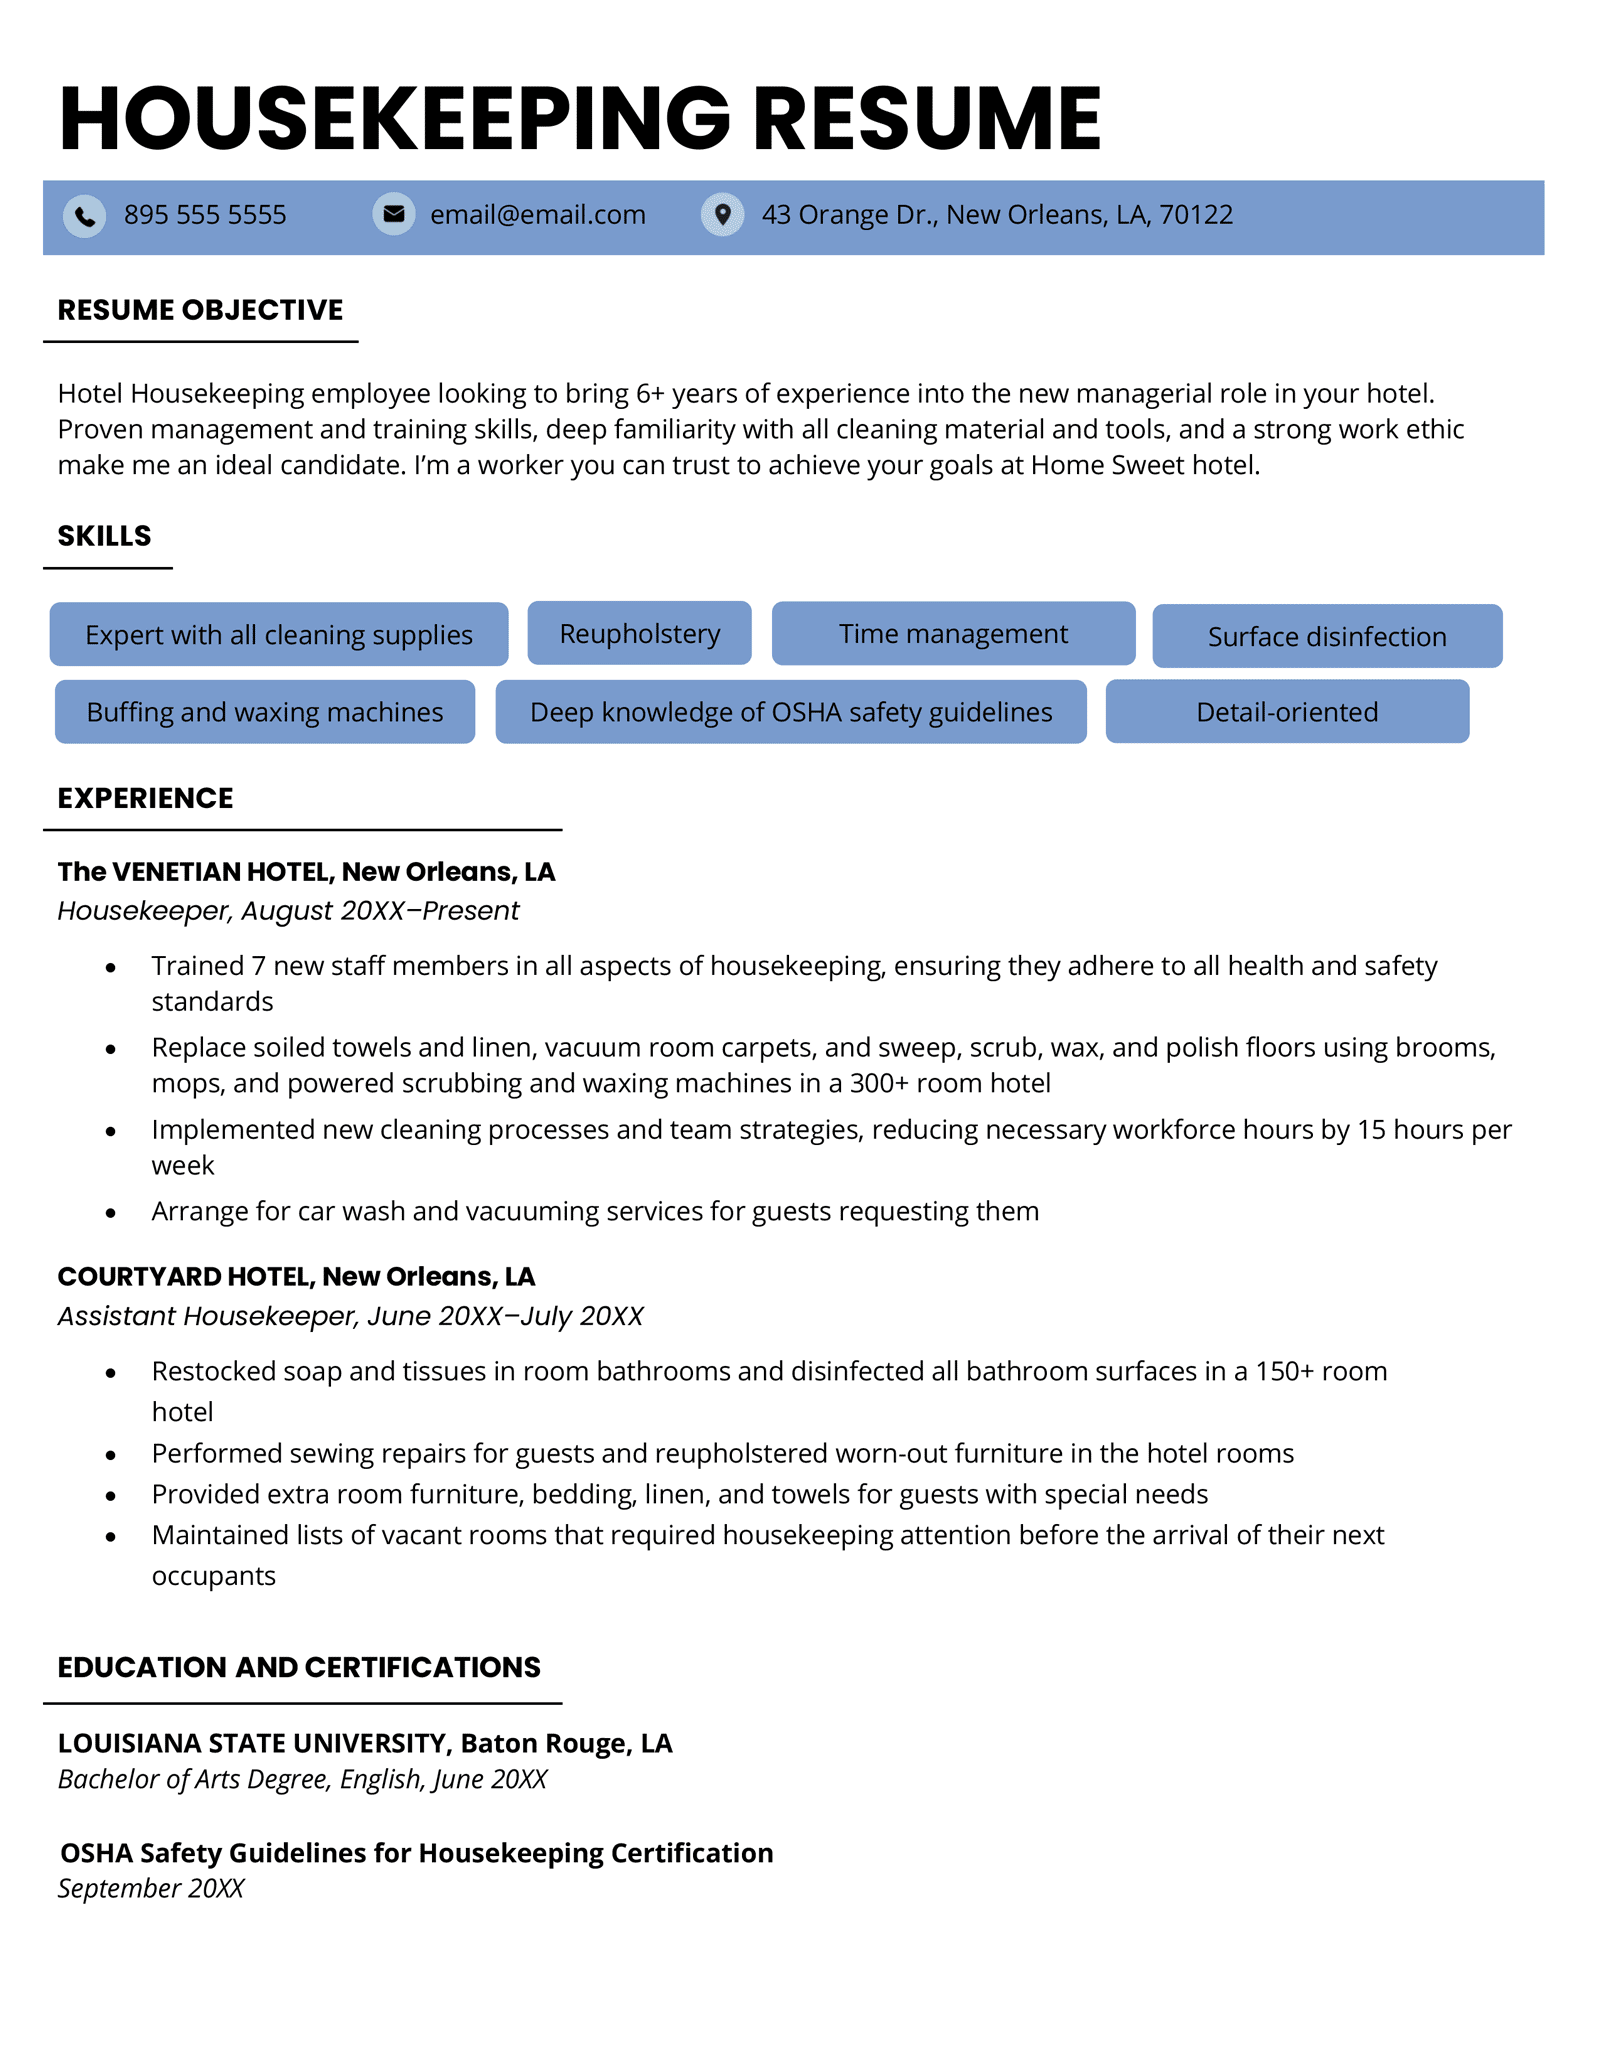 A housekeeping resume sample with violet highlights and skills near the top in a hybrid resume format